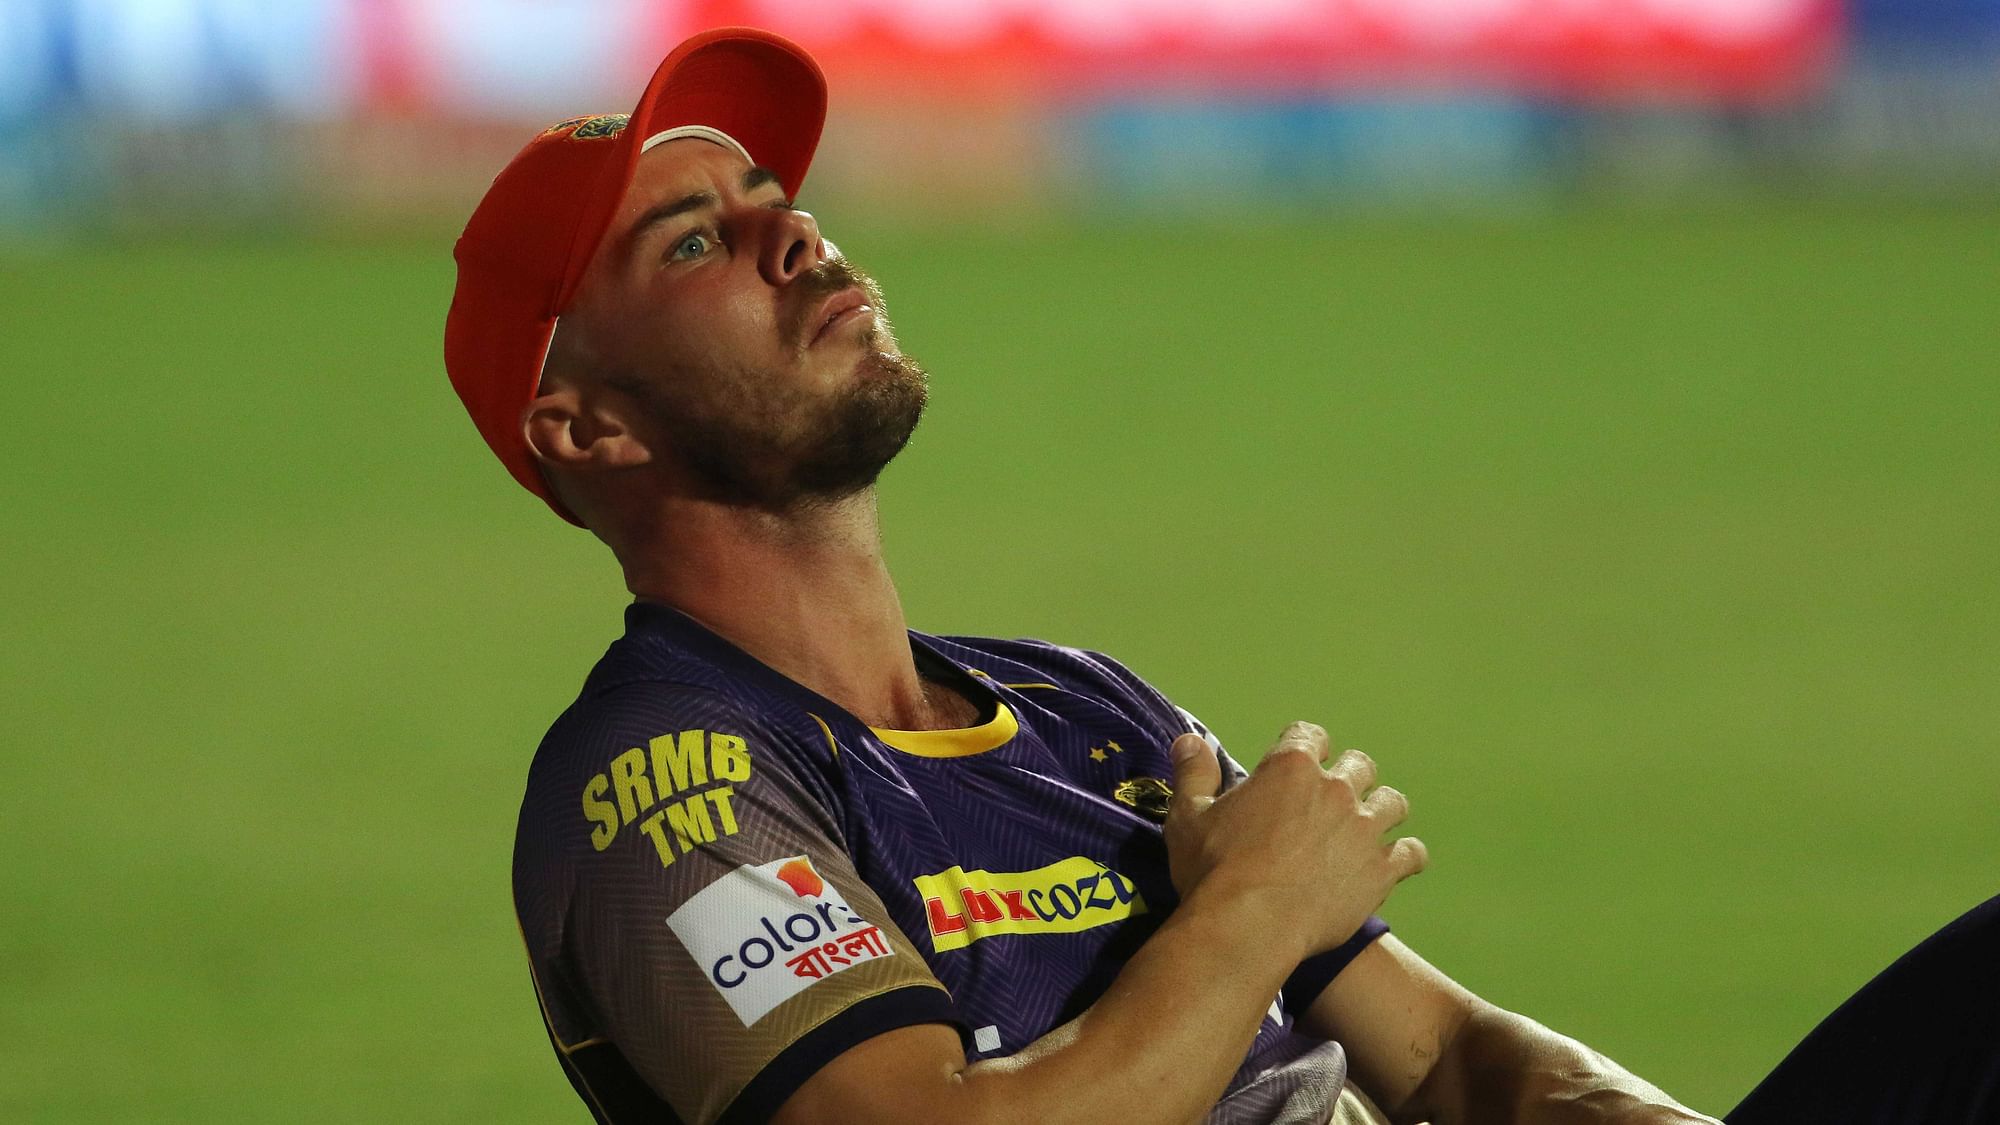 Chris Lynn injured his shoulder while fielding during the IPL match against Mumbai Indians. (Photo: BCCI)